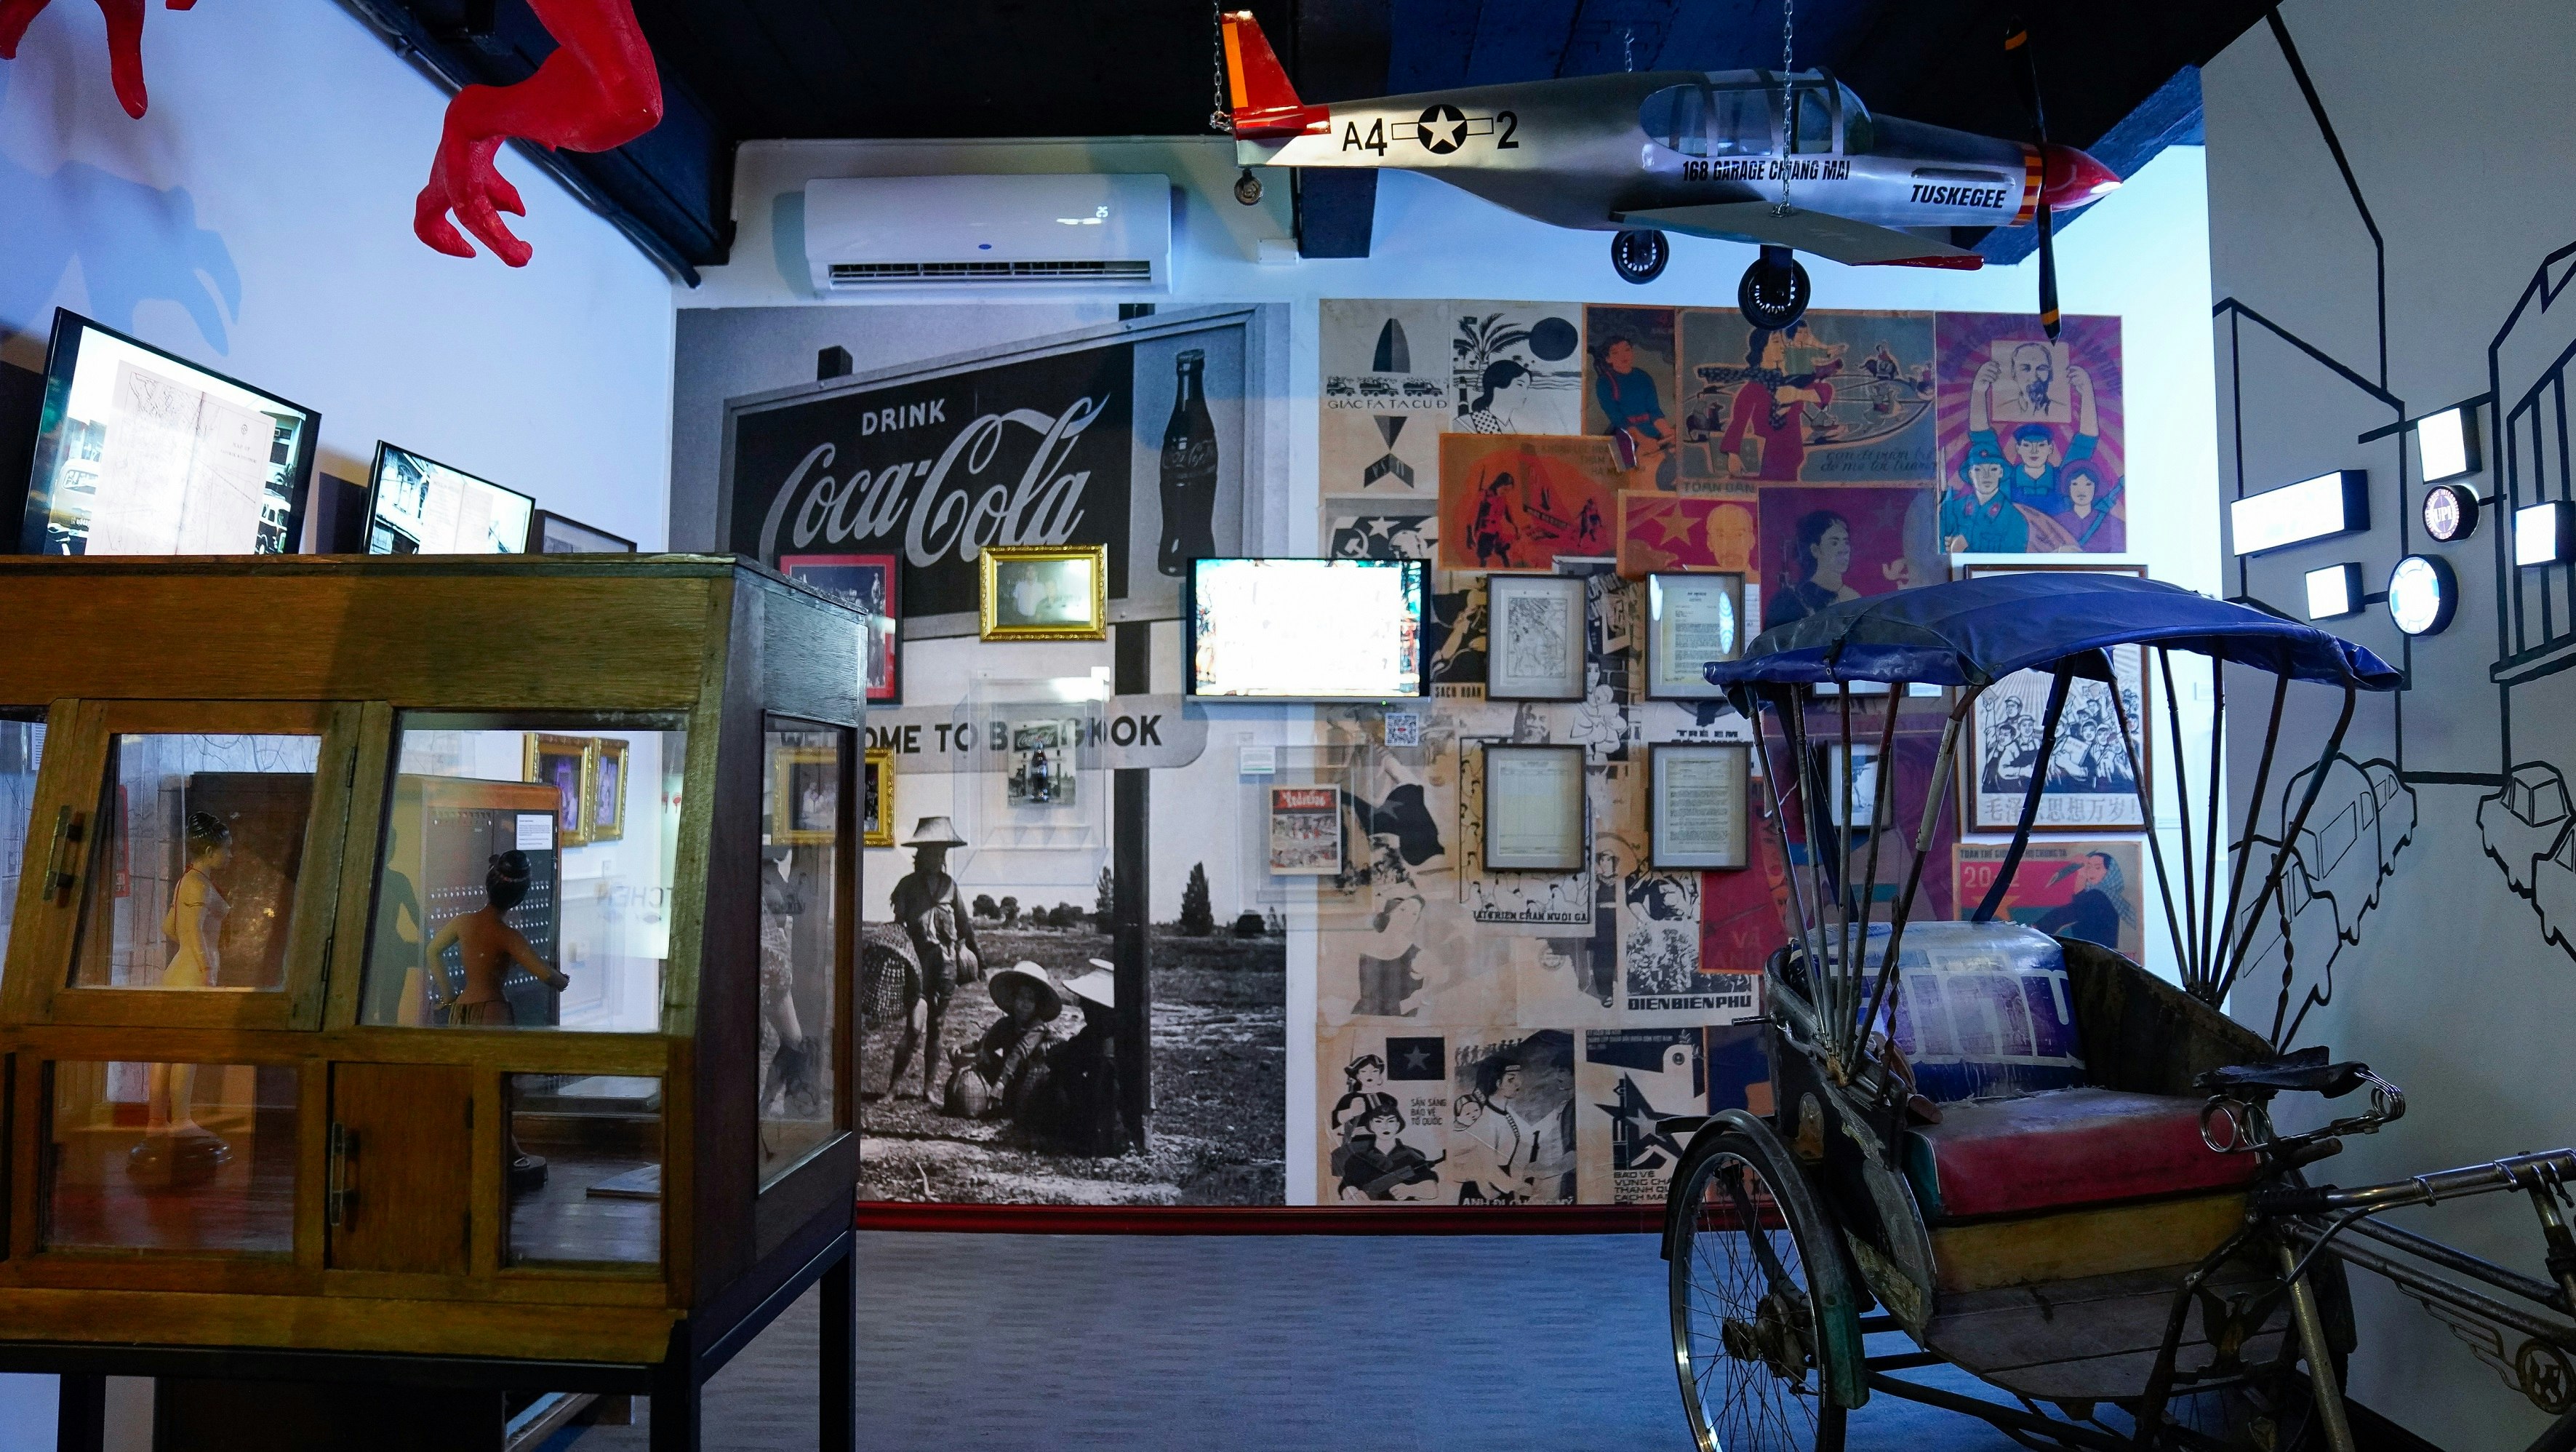 A room from the museum showcasing a number of posters and objects relating to Patpong's early history; including images of rural, farm scenes and an old-looking rickshaw.